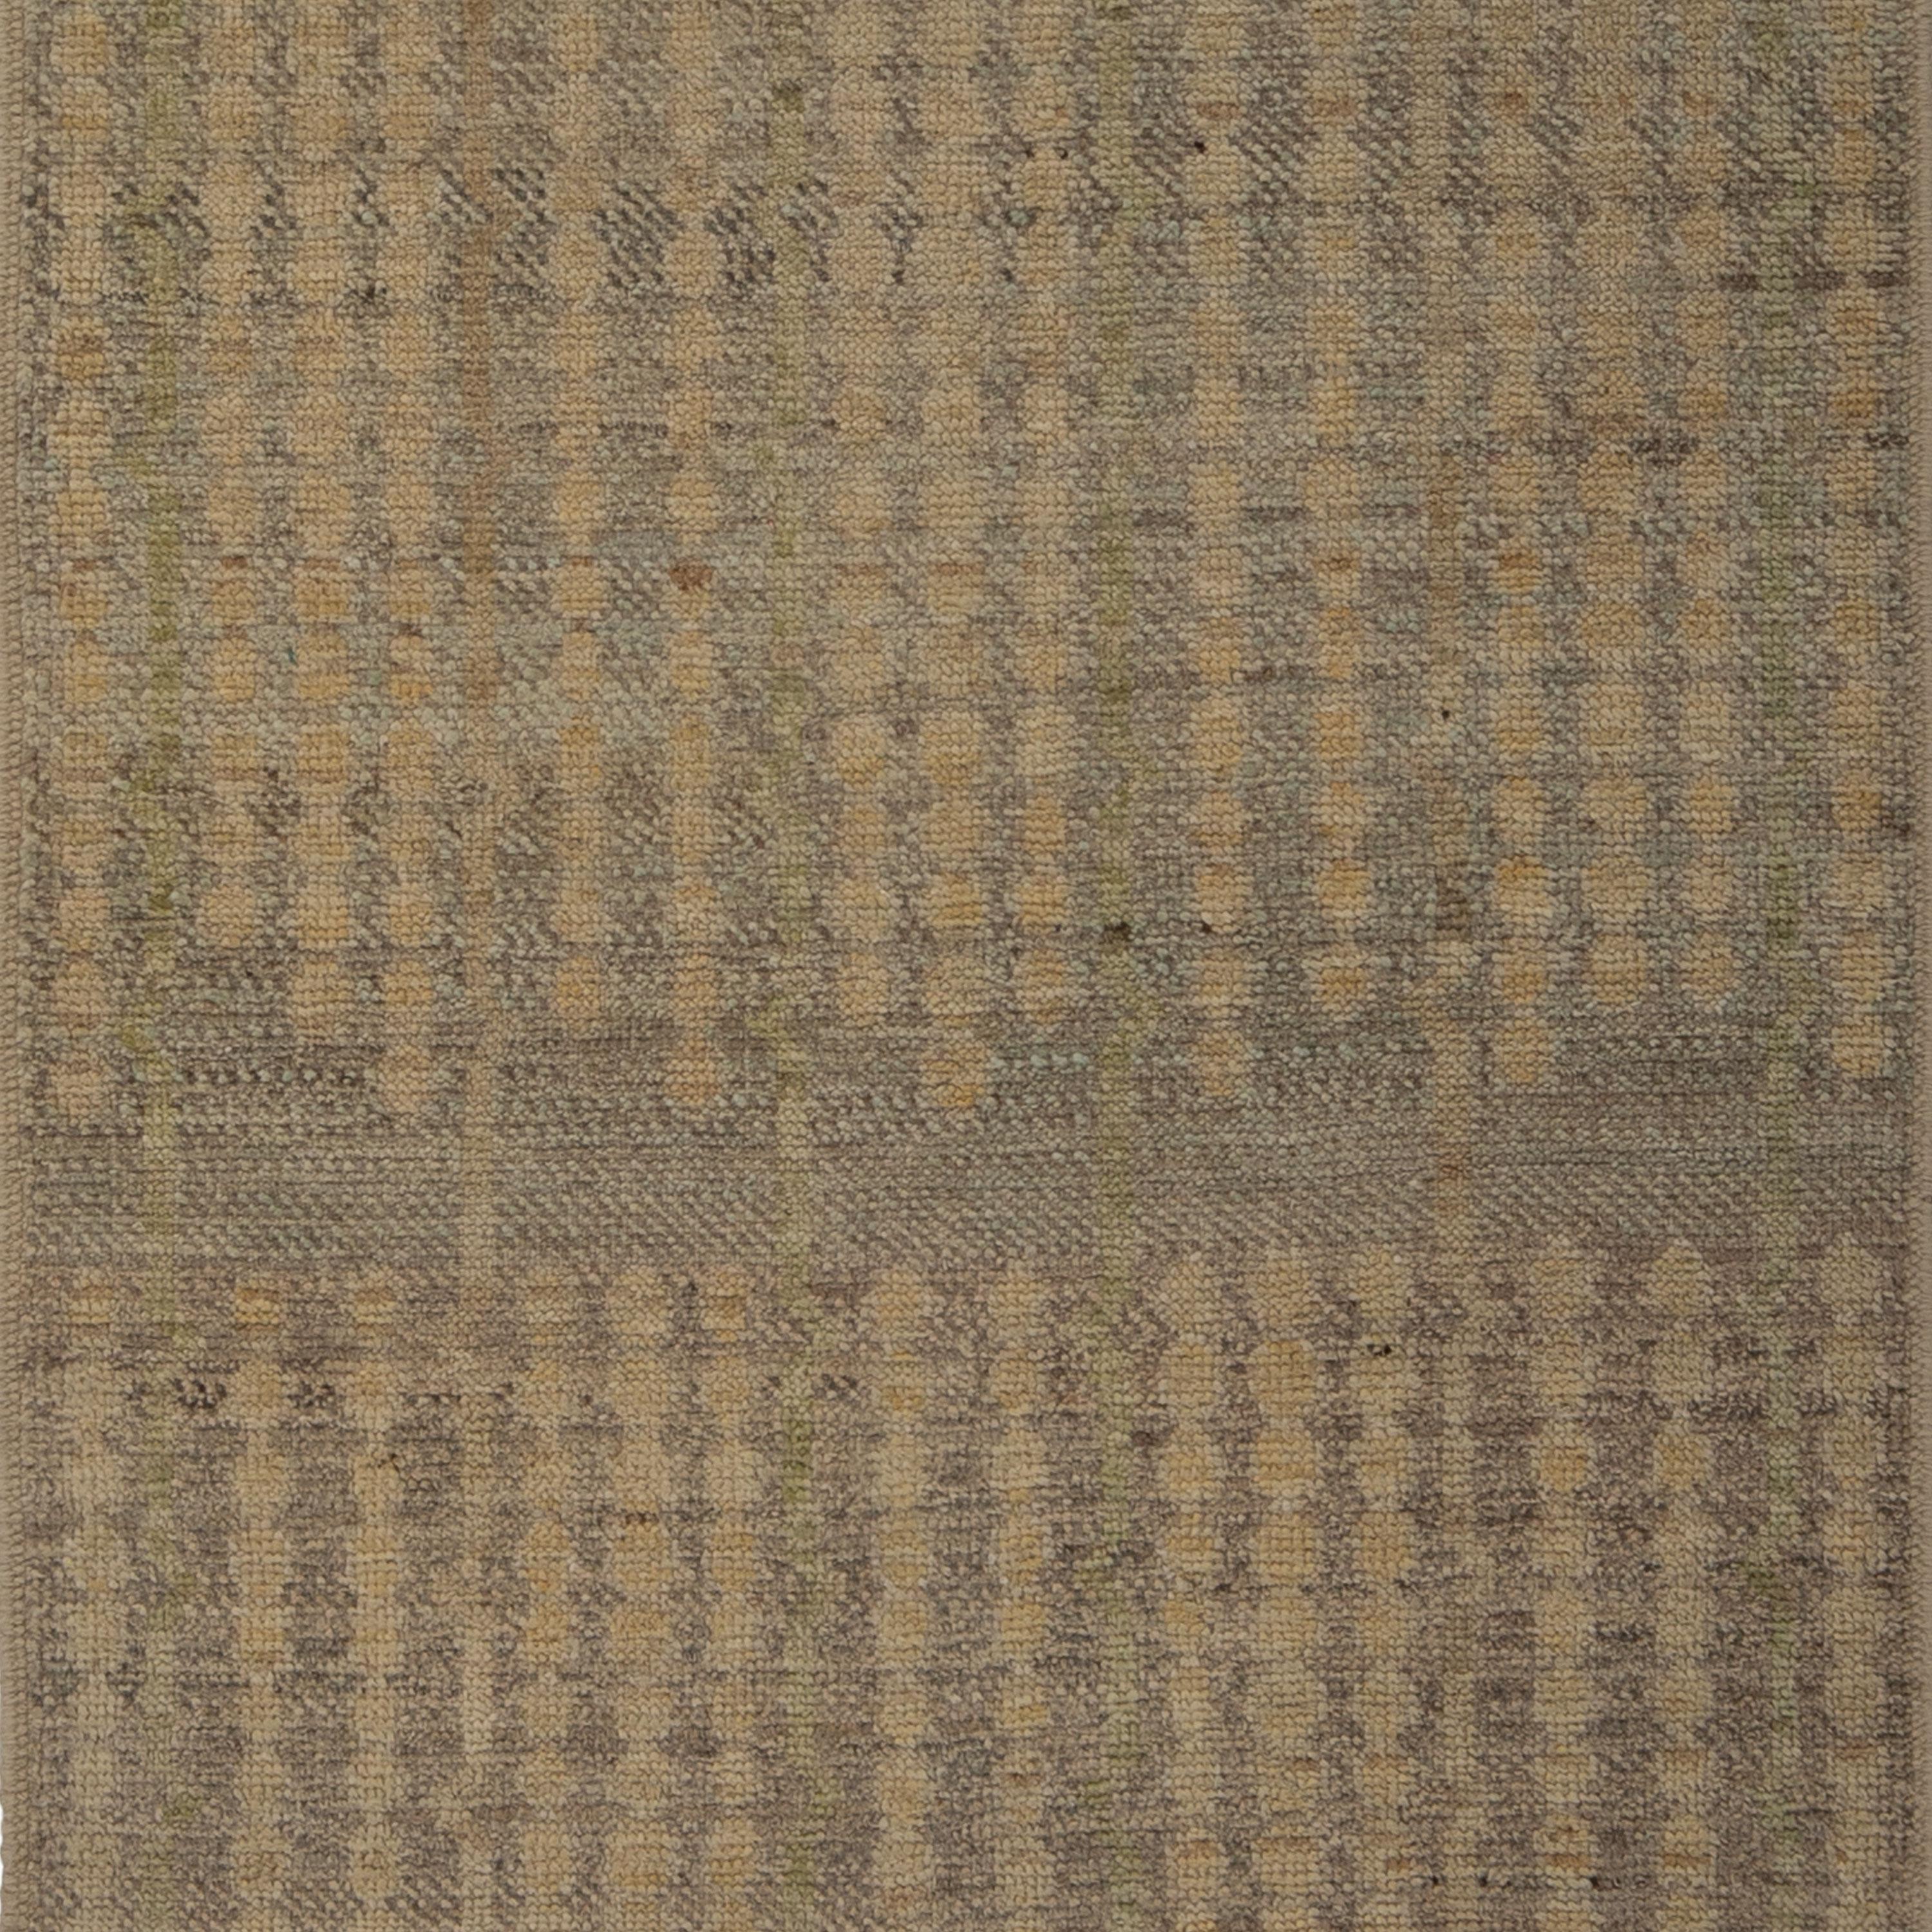 Inspired by the grounding foundations of Earth's natural colors and pure materials, the Zameen Collection features a wide array of Mid-century modern motifs in soft neutral tones. Hand-knotted in Central Asia, Zameen rugs will be celebrated for